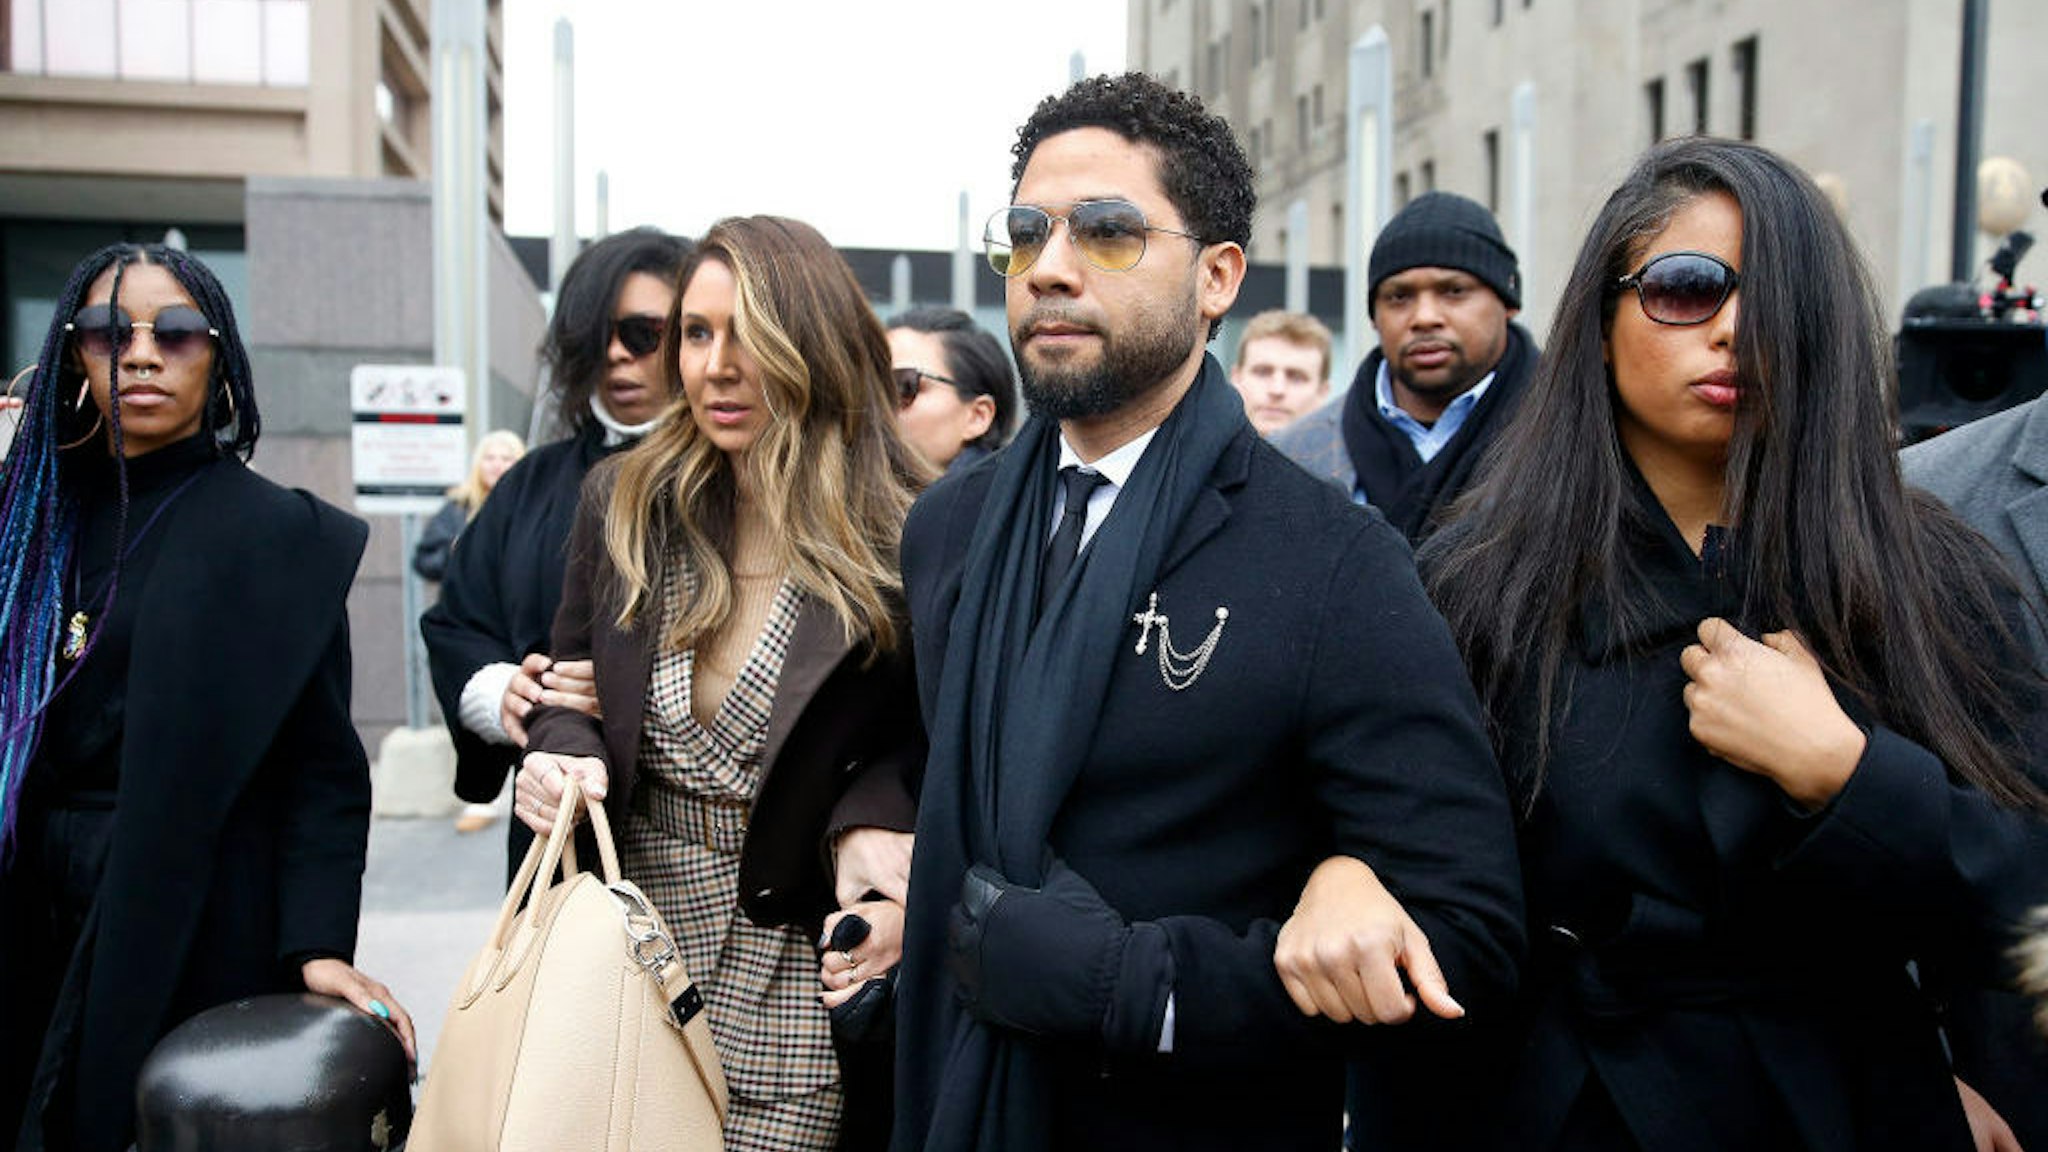 CHICAGO, ILLINOIS - FEBRUARY 24: Flanked by attorneys and supporters, actor Jussie Smollett arrives at the Leighton Criminal Courthouse on February 24, 2020 in Chicago, Illinois. (Photo by Nuccio DiNuzzo/Getty Images)